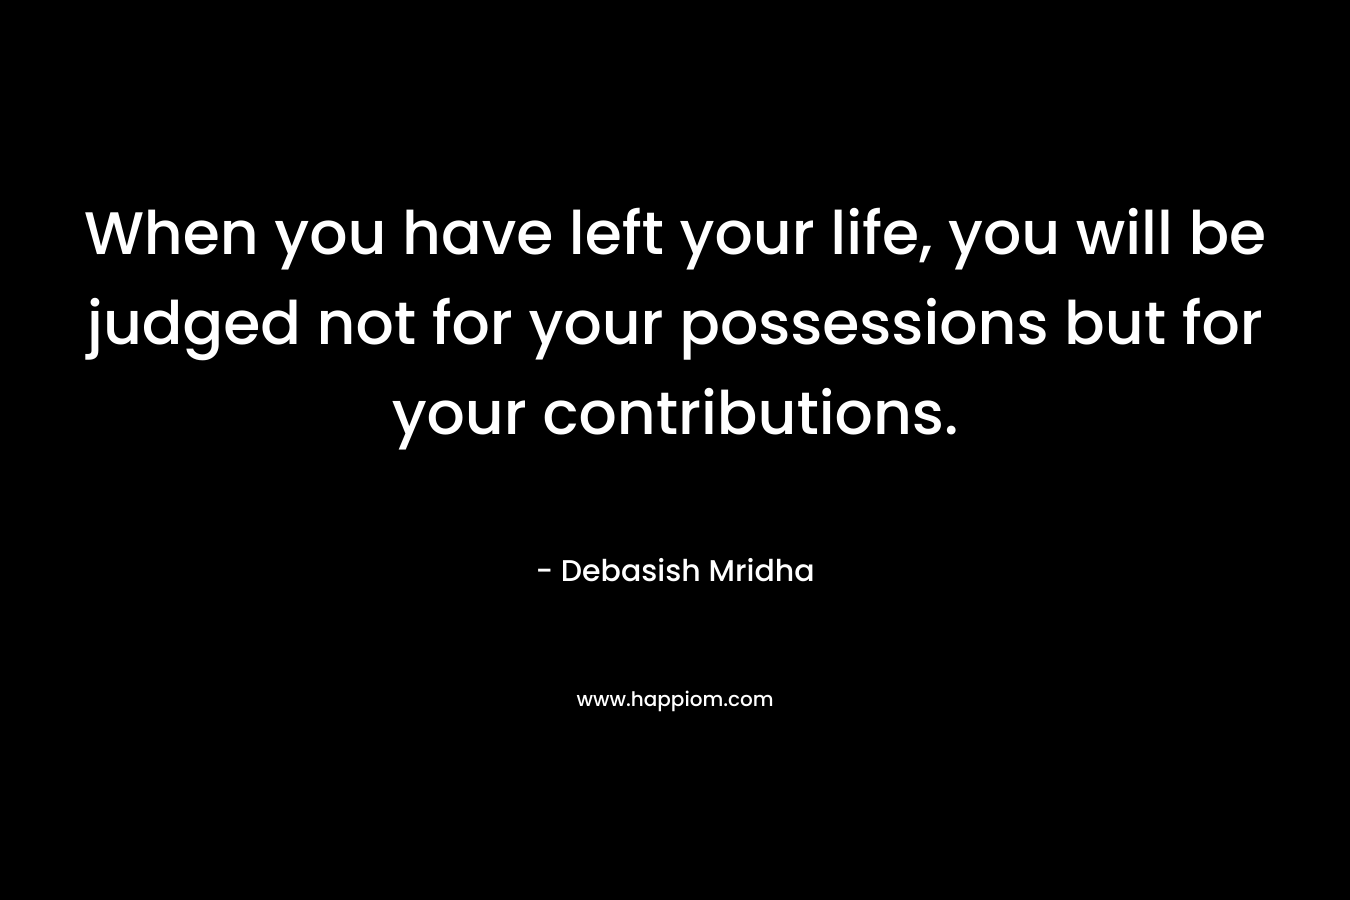 When you have left your life, you will be judged not for your possessions but for your contributions.